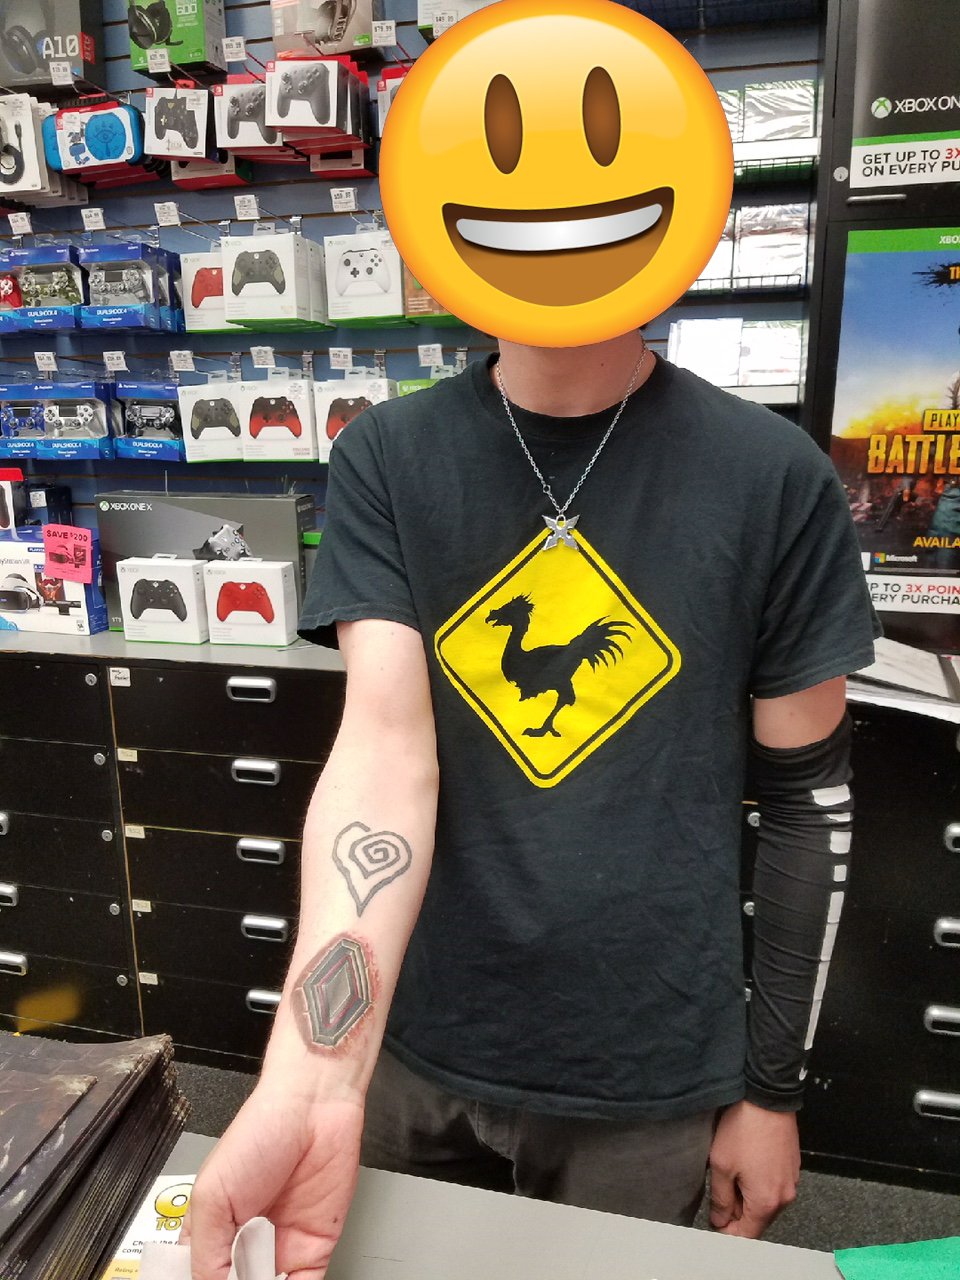 Top more than 70 ark survival evolved tattoo - in.eteachers